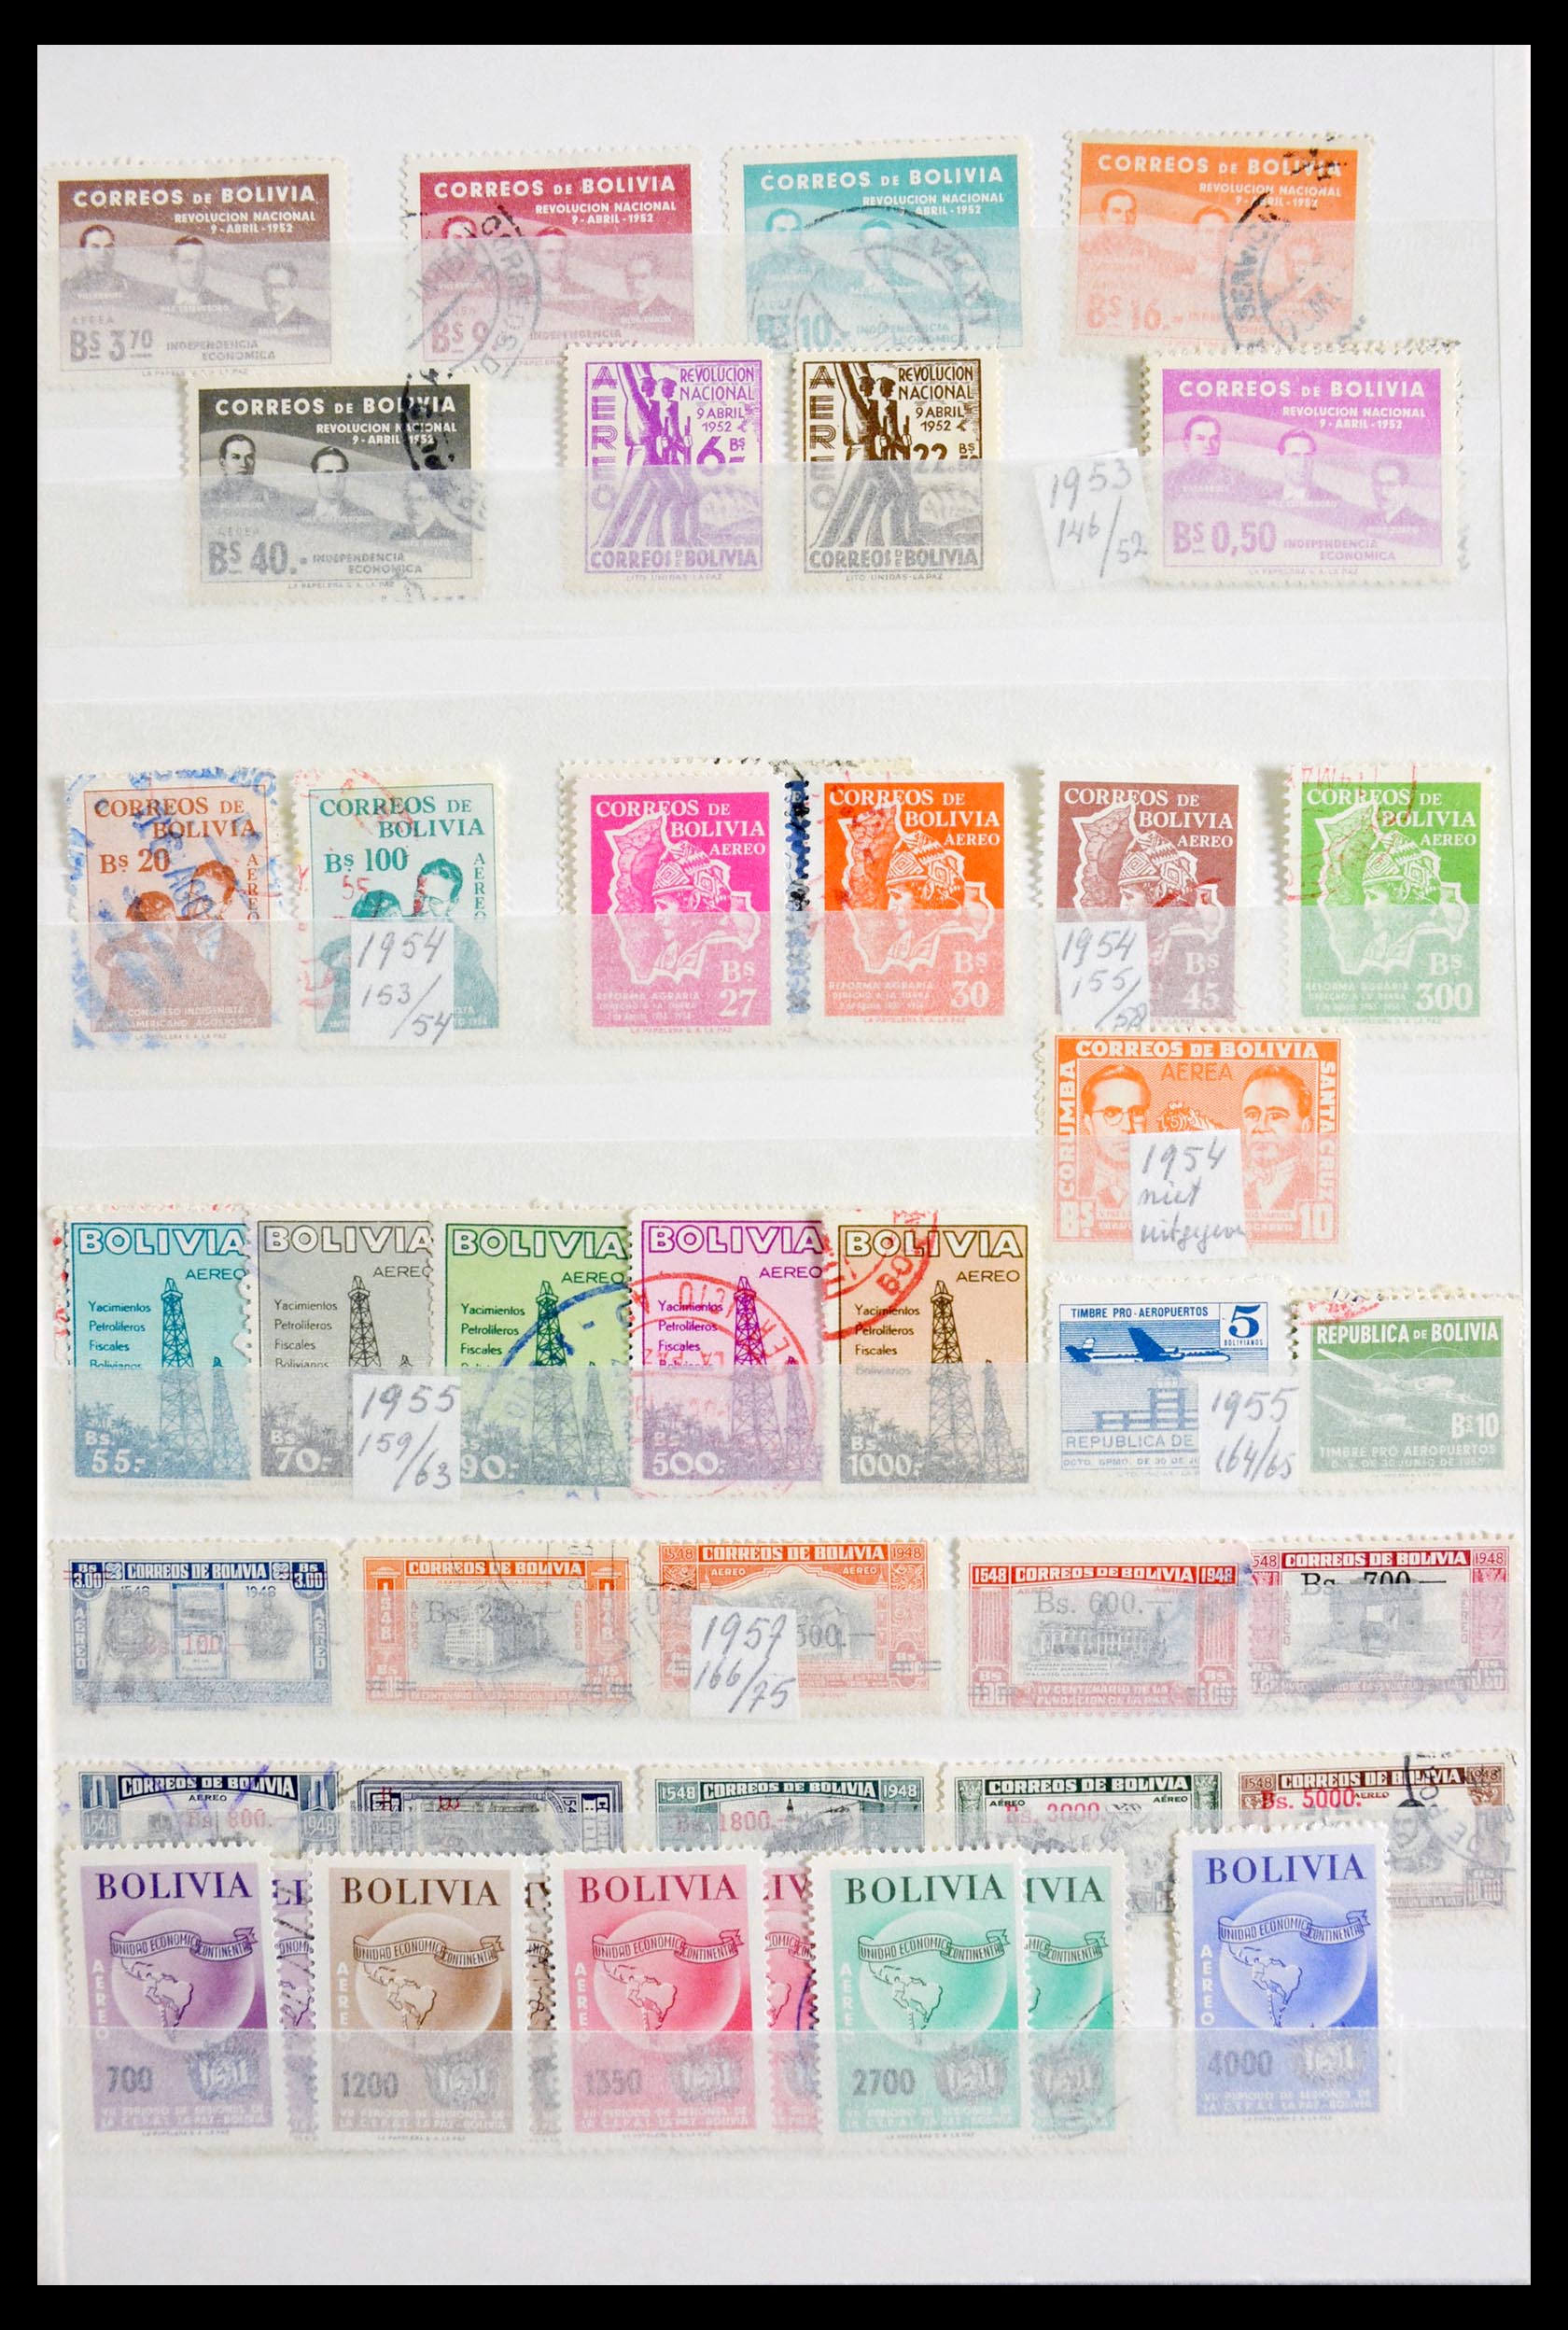 29917 019 - 29917 Latin America airmail stamps.